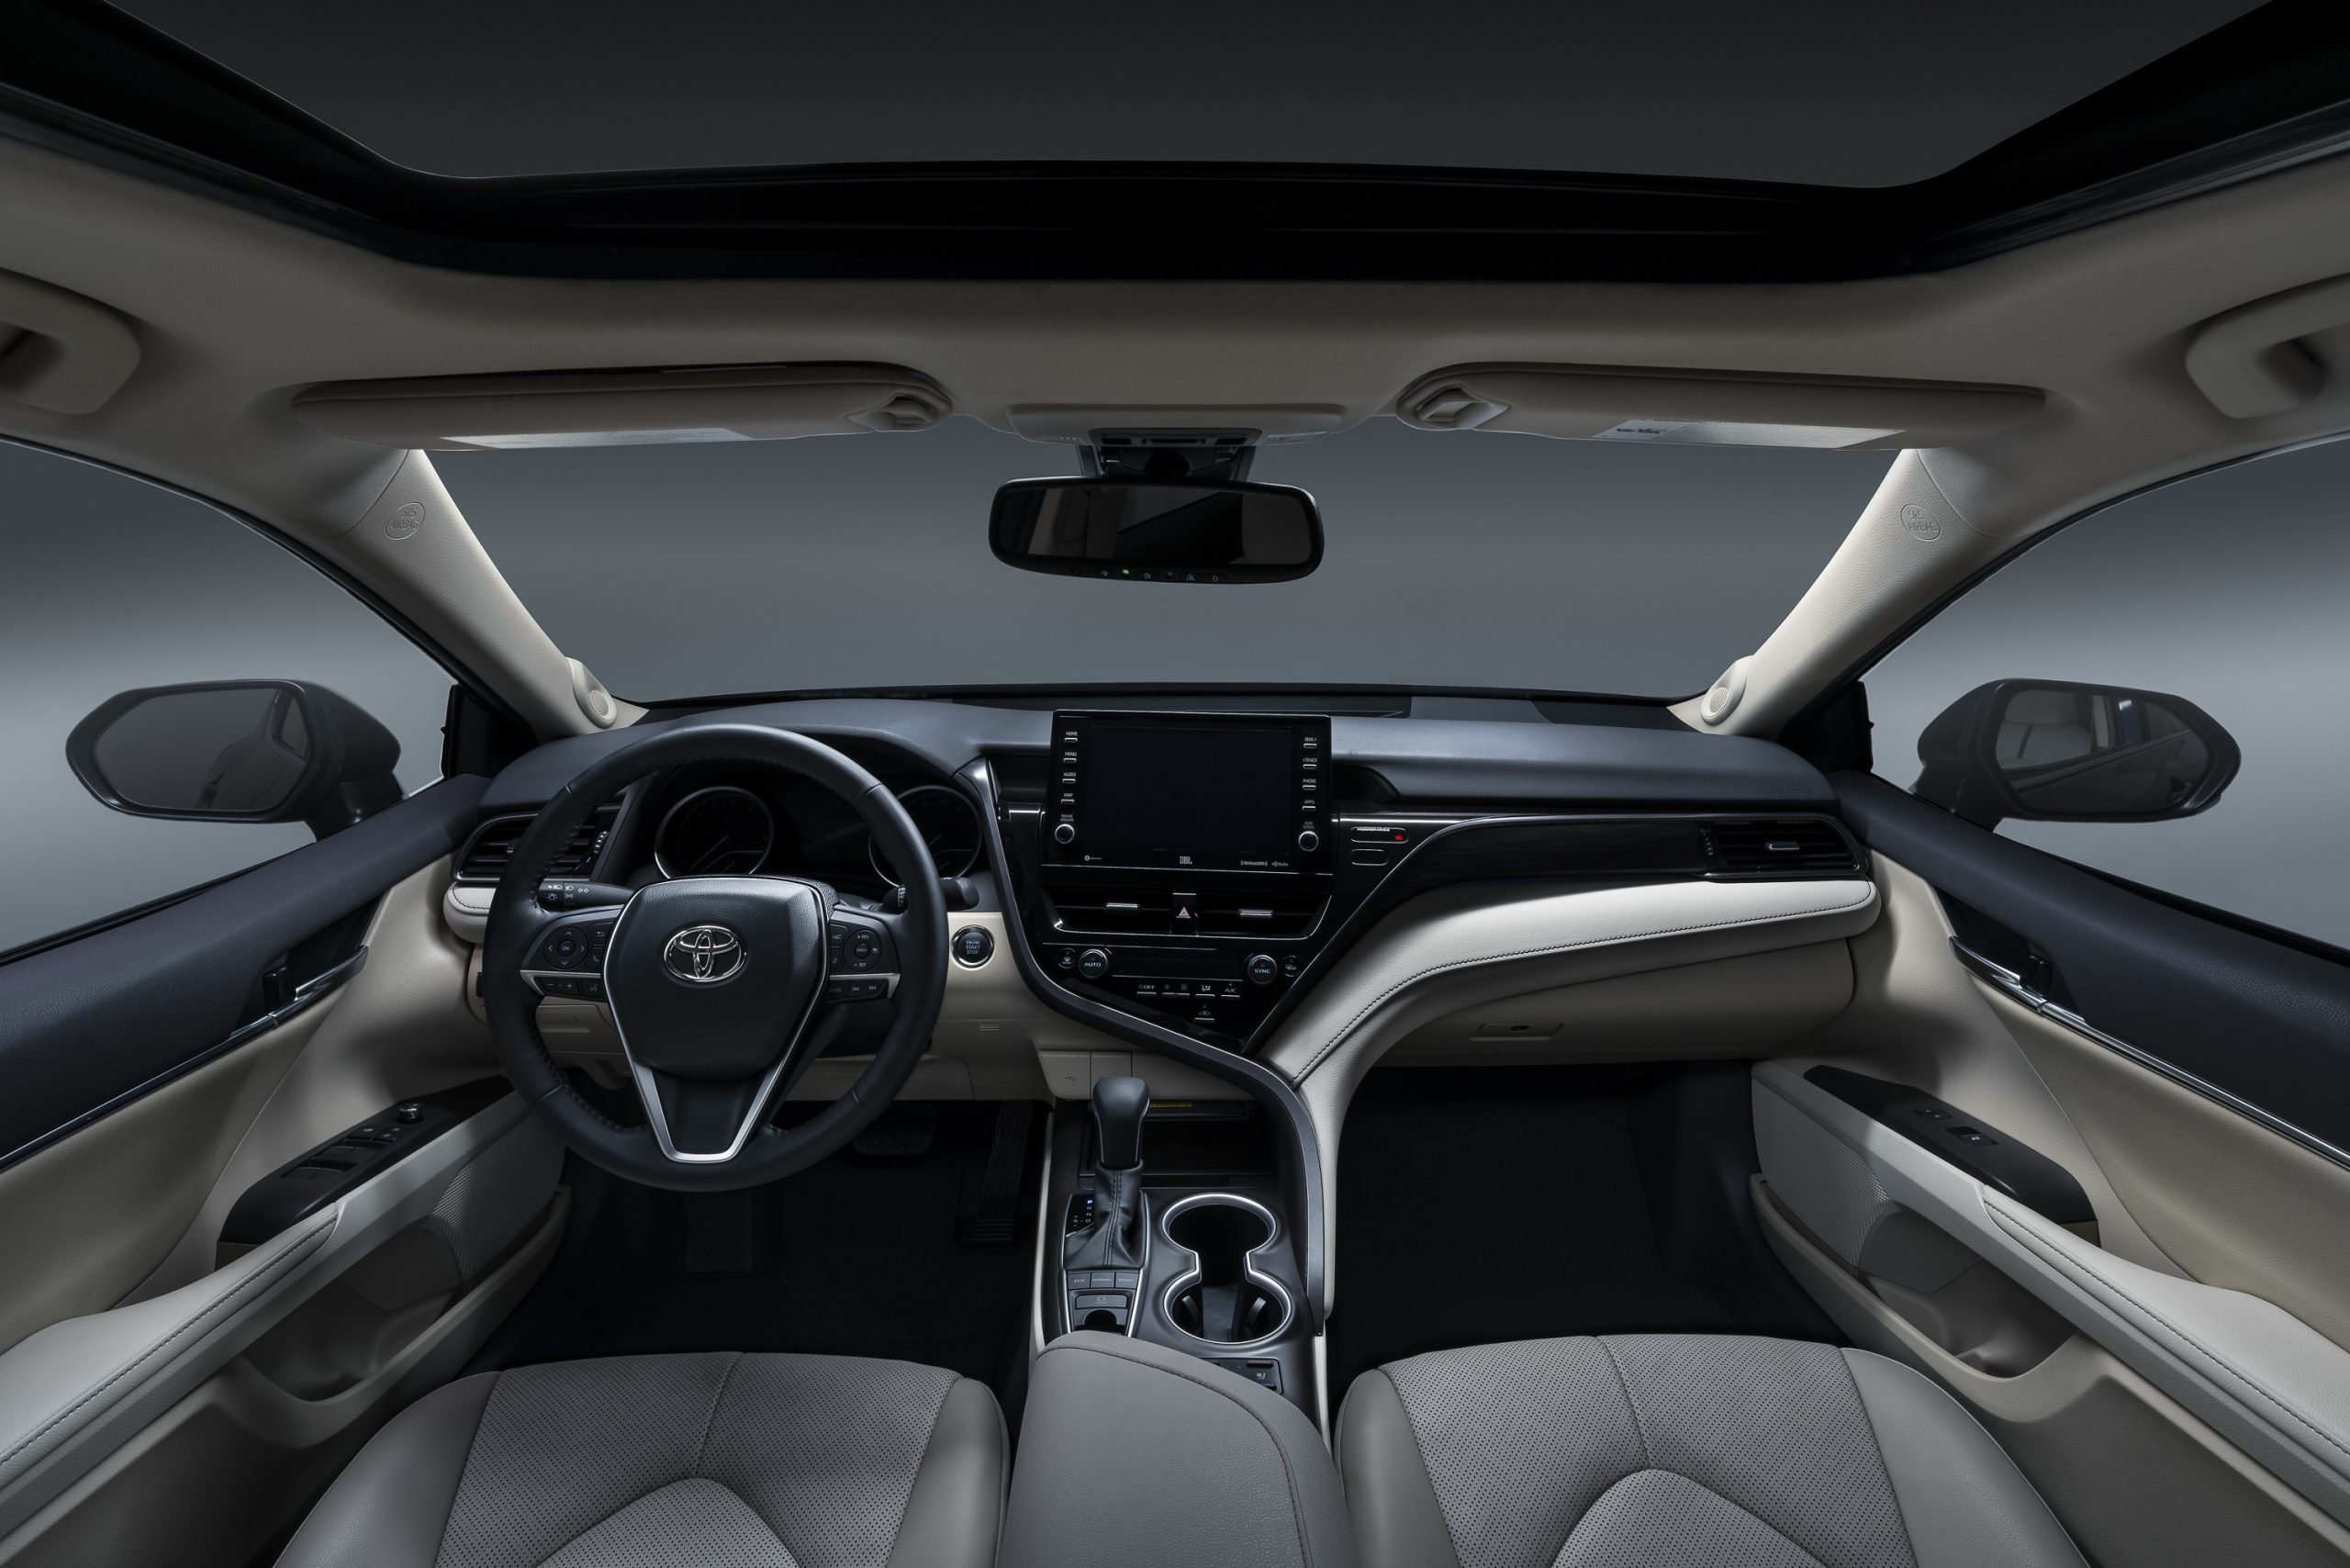 The white and black interior of the new 2022 Toyota Camry sedan